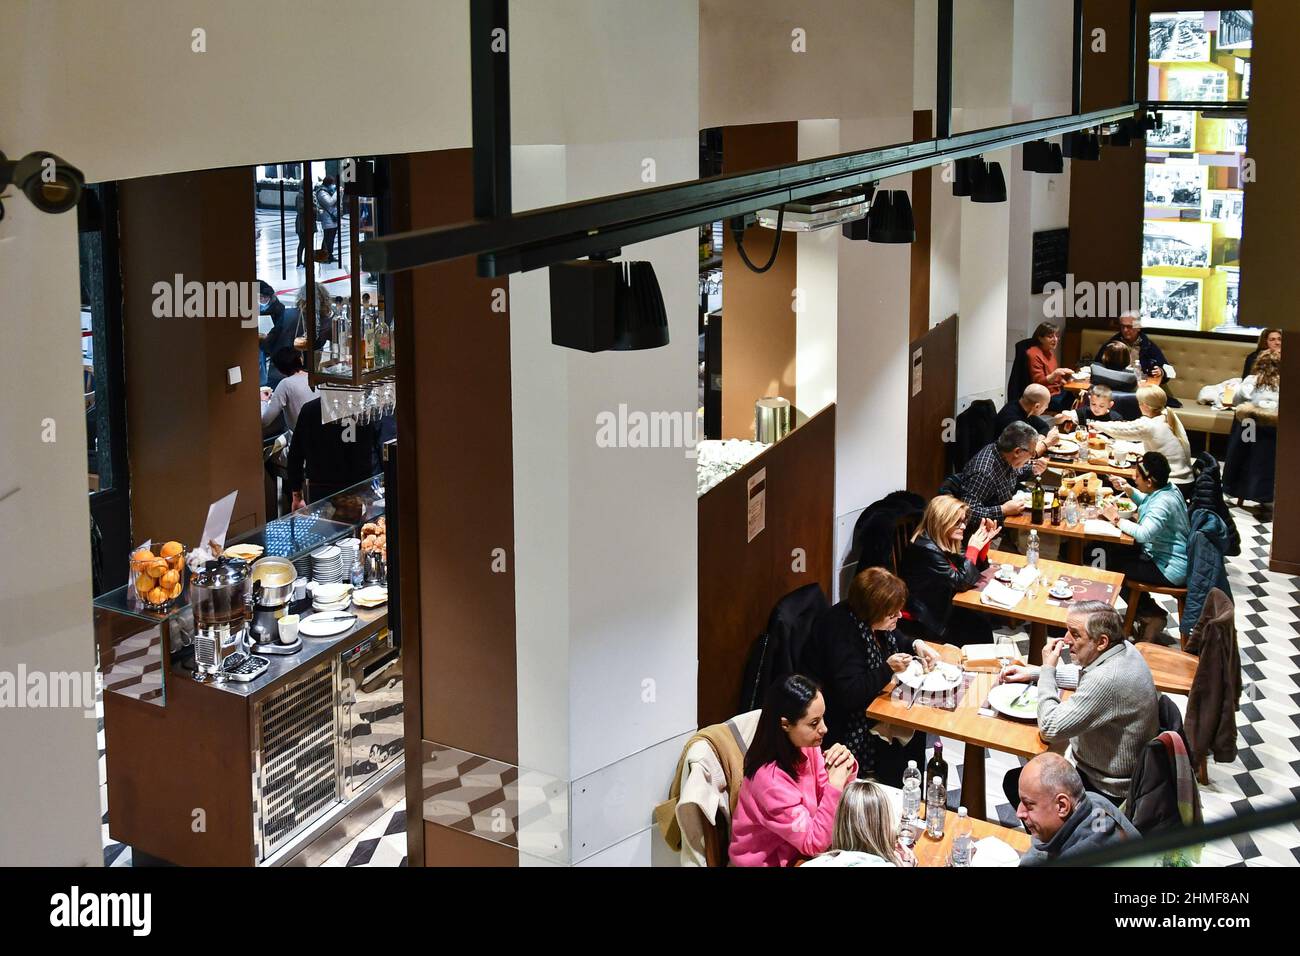 People having lunch at the restaurant 'La Credenza' by Fiorfood Coop in Galleria San Federico, historical shopping gallery in Turin, Piedmont, Italy Stock Photo